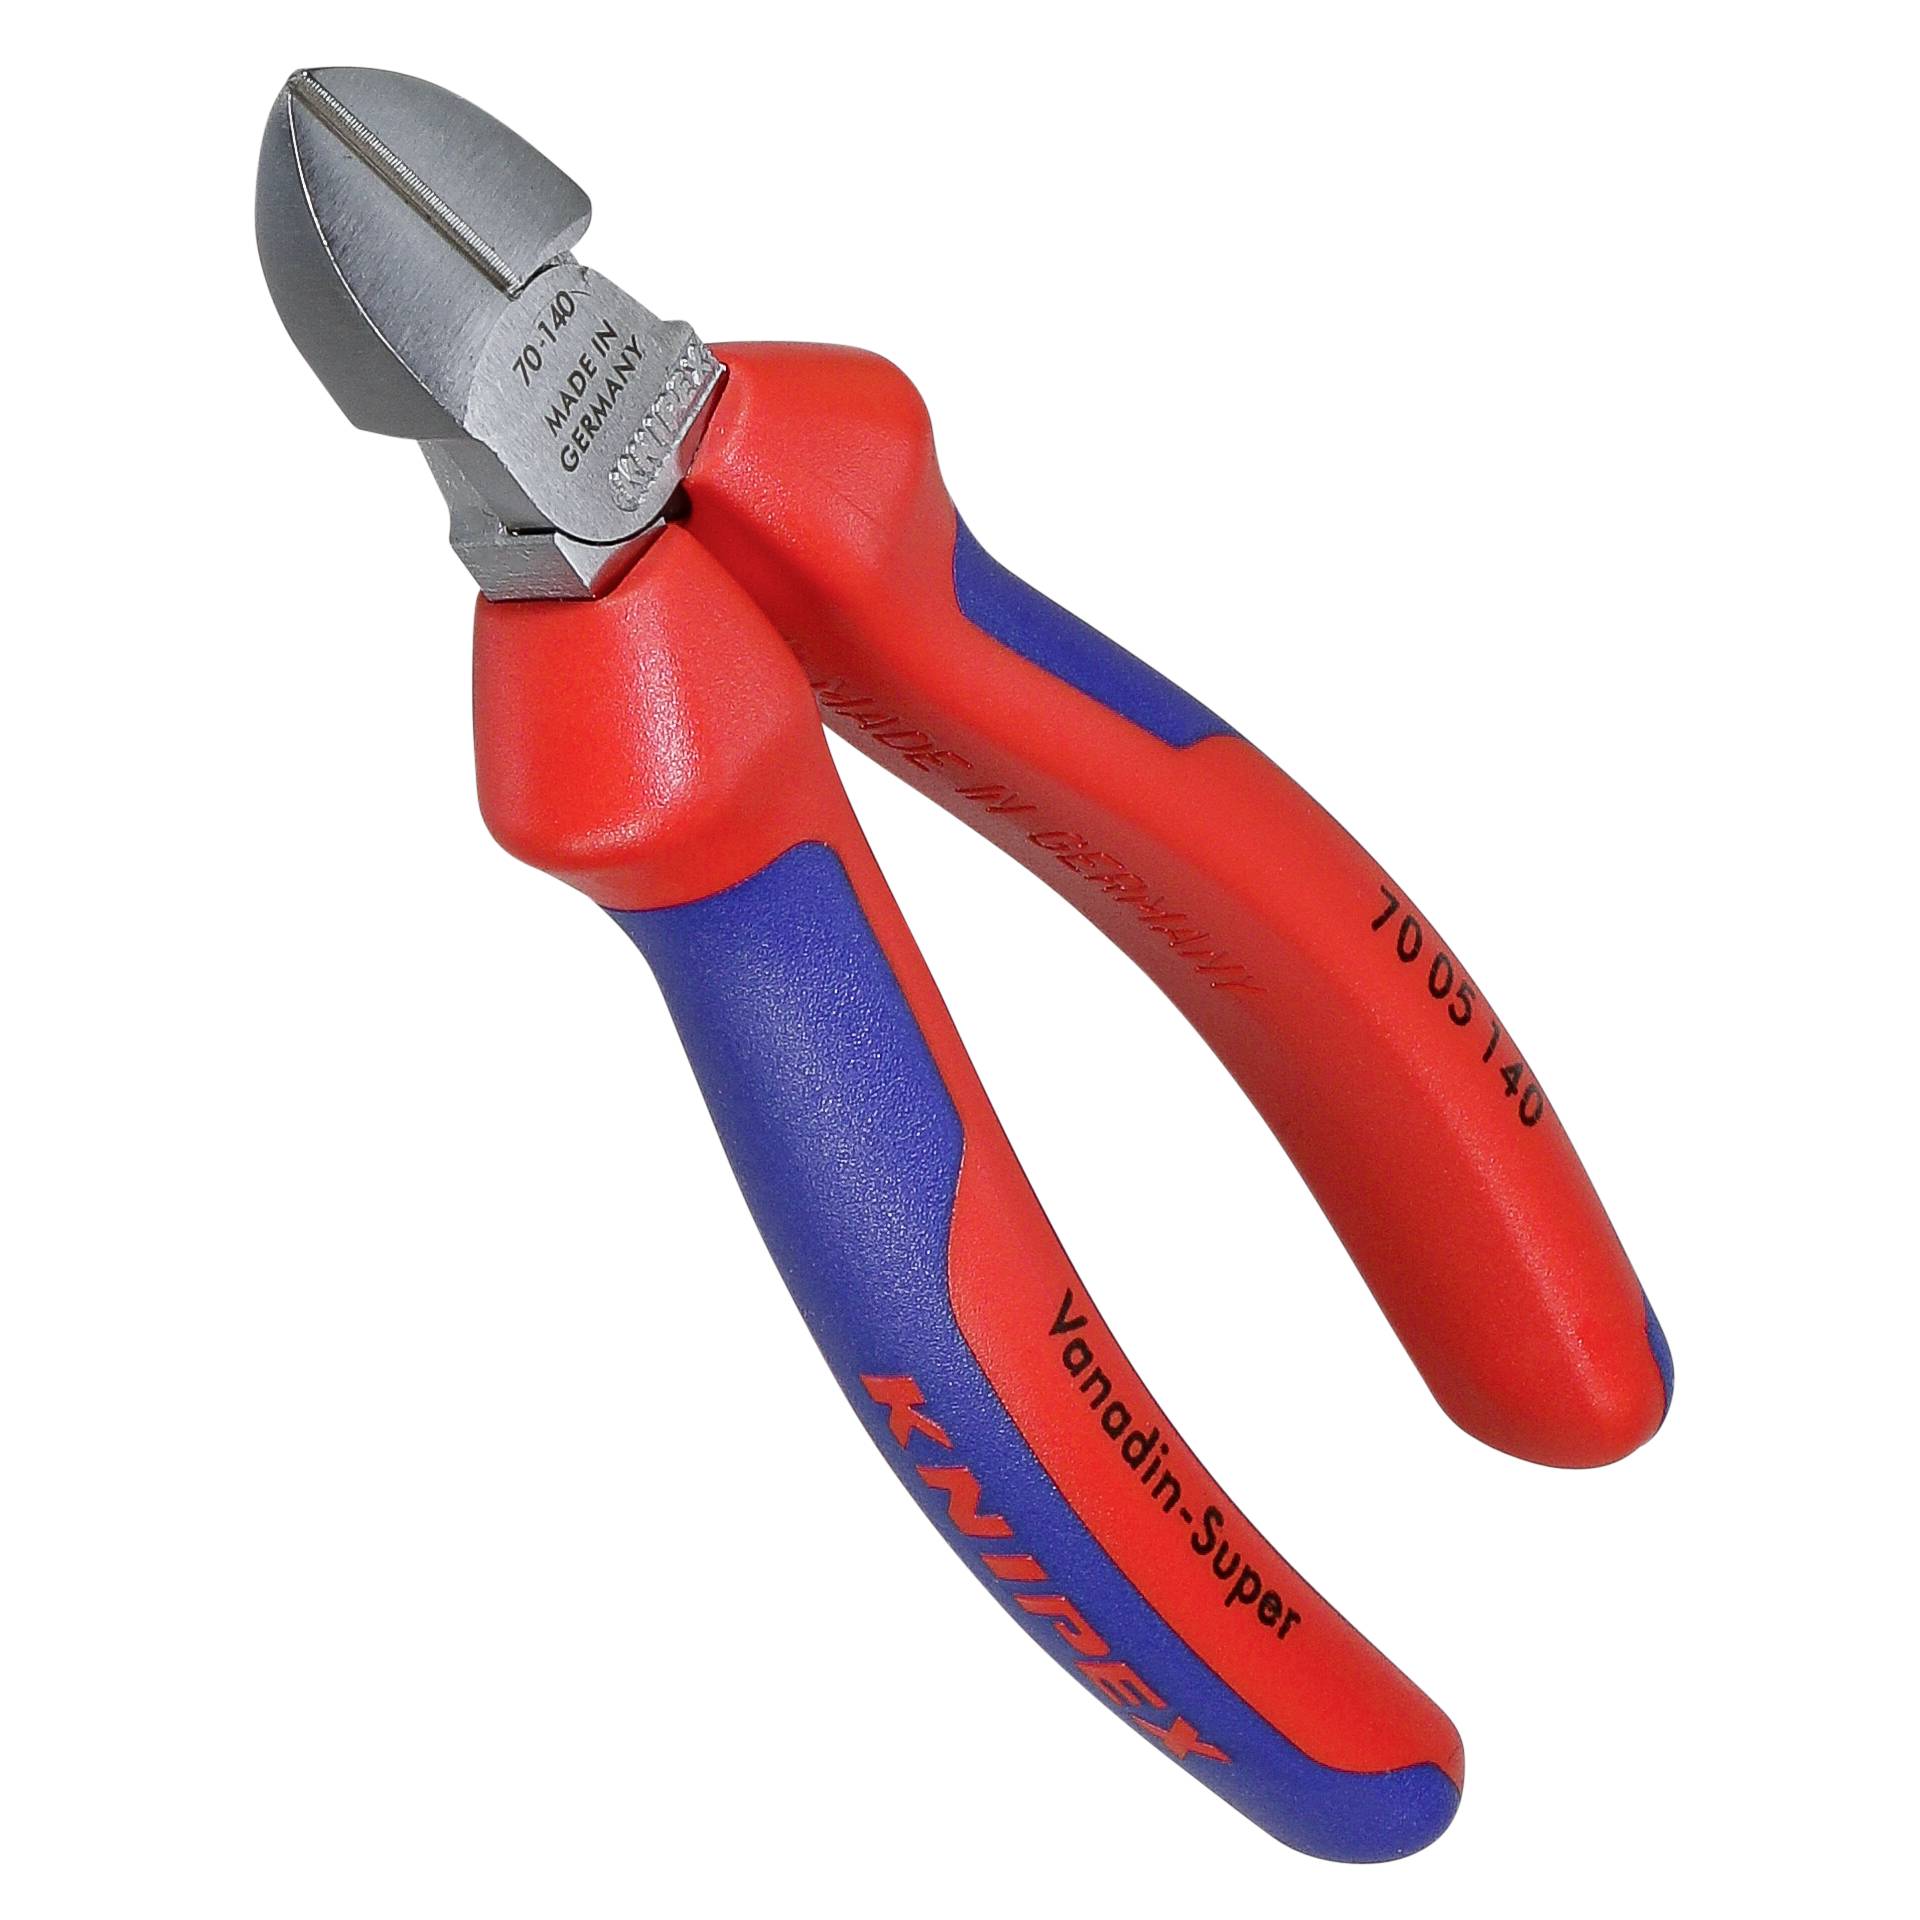 KNIPEX tronchese laterale cromato 140 mm